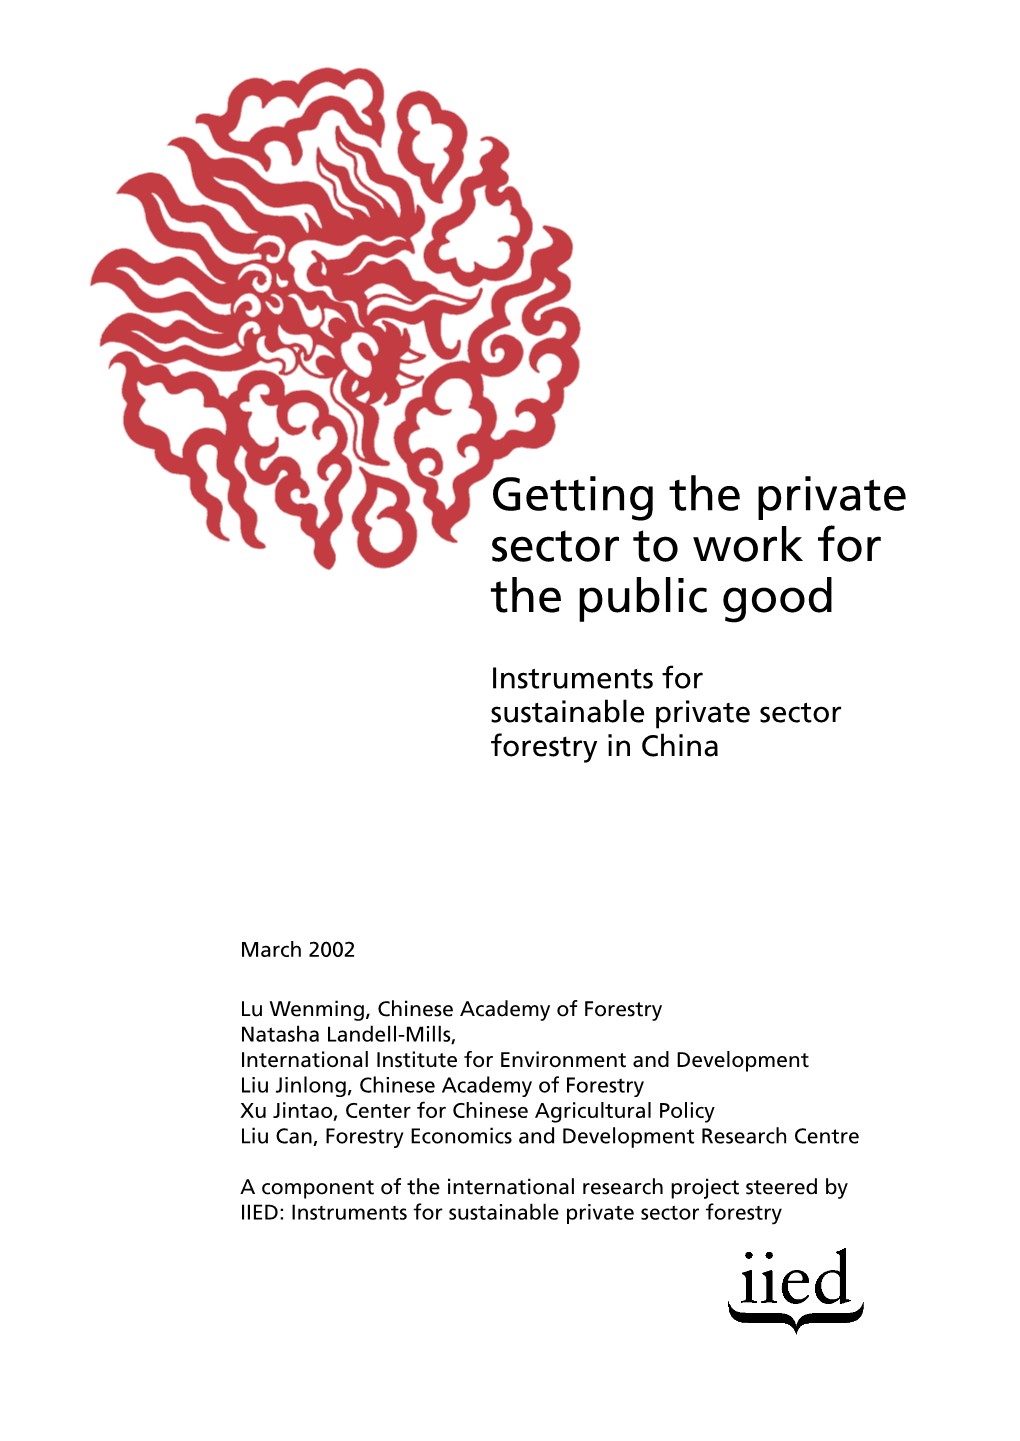 Getting the Private Sector to Work for the Public Good